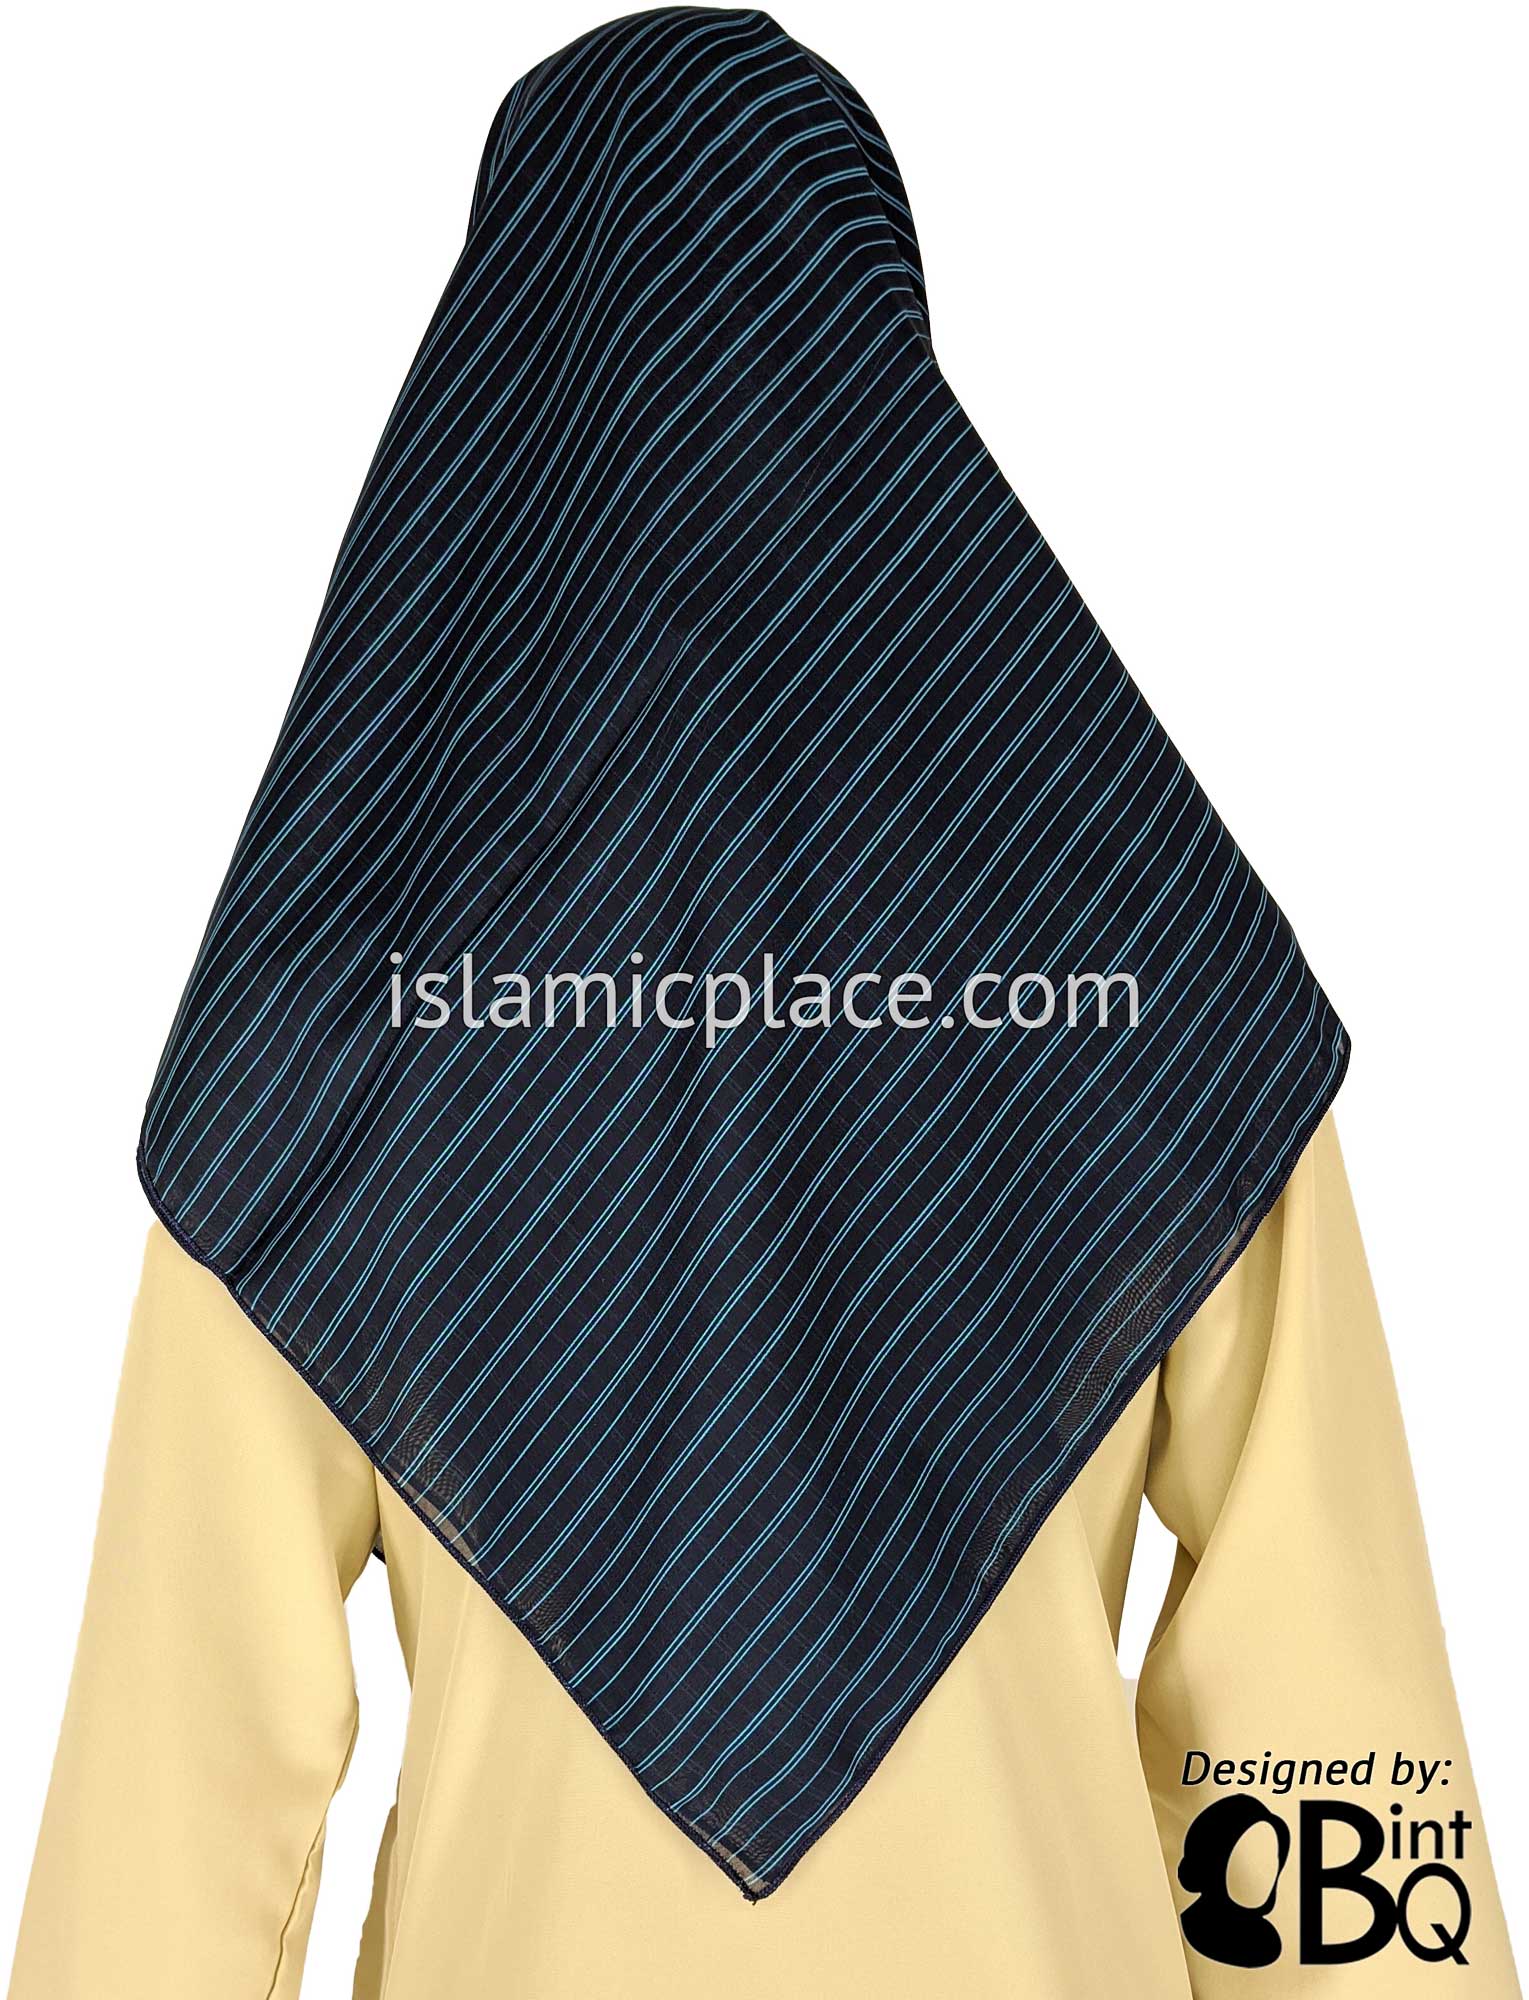 Turquoise Pinstripe on Navy Blue - 45" Square Printed Khimar